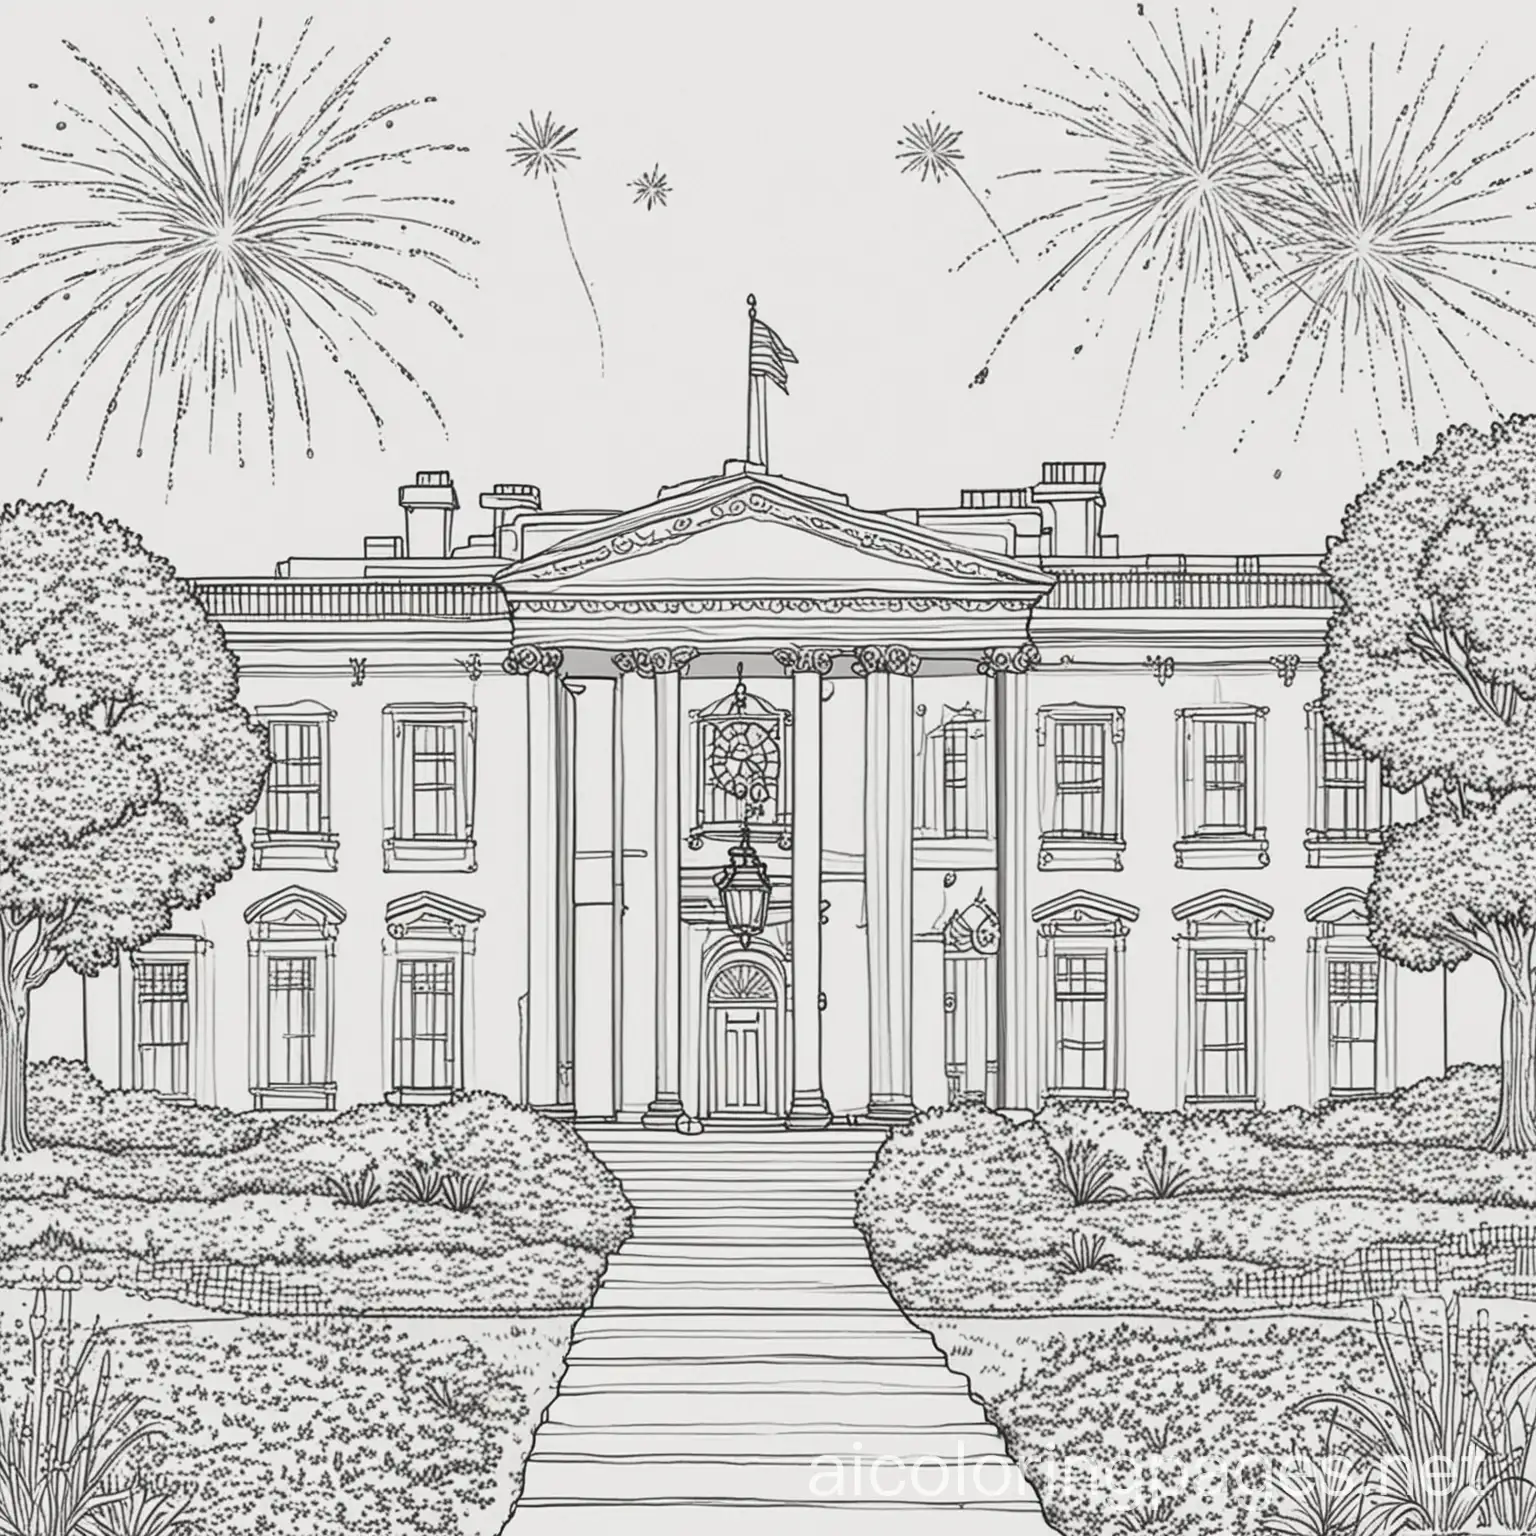 the white house in all its glory with fireworks in the air behind and above it Coloring Page, black and white, line art, white background, Simplicity,The background of the coloring page is plain white to make it easy for young children to color within the lines. The outlines of all the subjects are easy to distinguish, making it simple for kids to color without too much difficulty, Coloring Page, black and white, line art, white background, Simplicity, Ample White Space. The background of the coloring page is plain white to make it easy for young children to color within the lines. The outlines of all the subjects are easy to distinguish, making it simple for kids to color without too much difficulty 